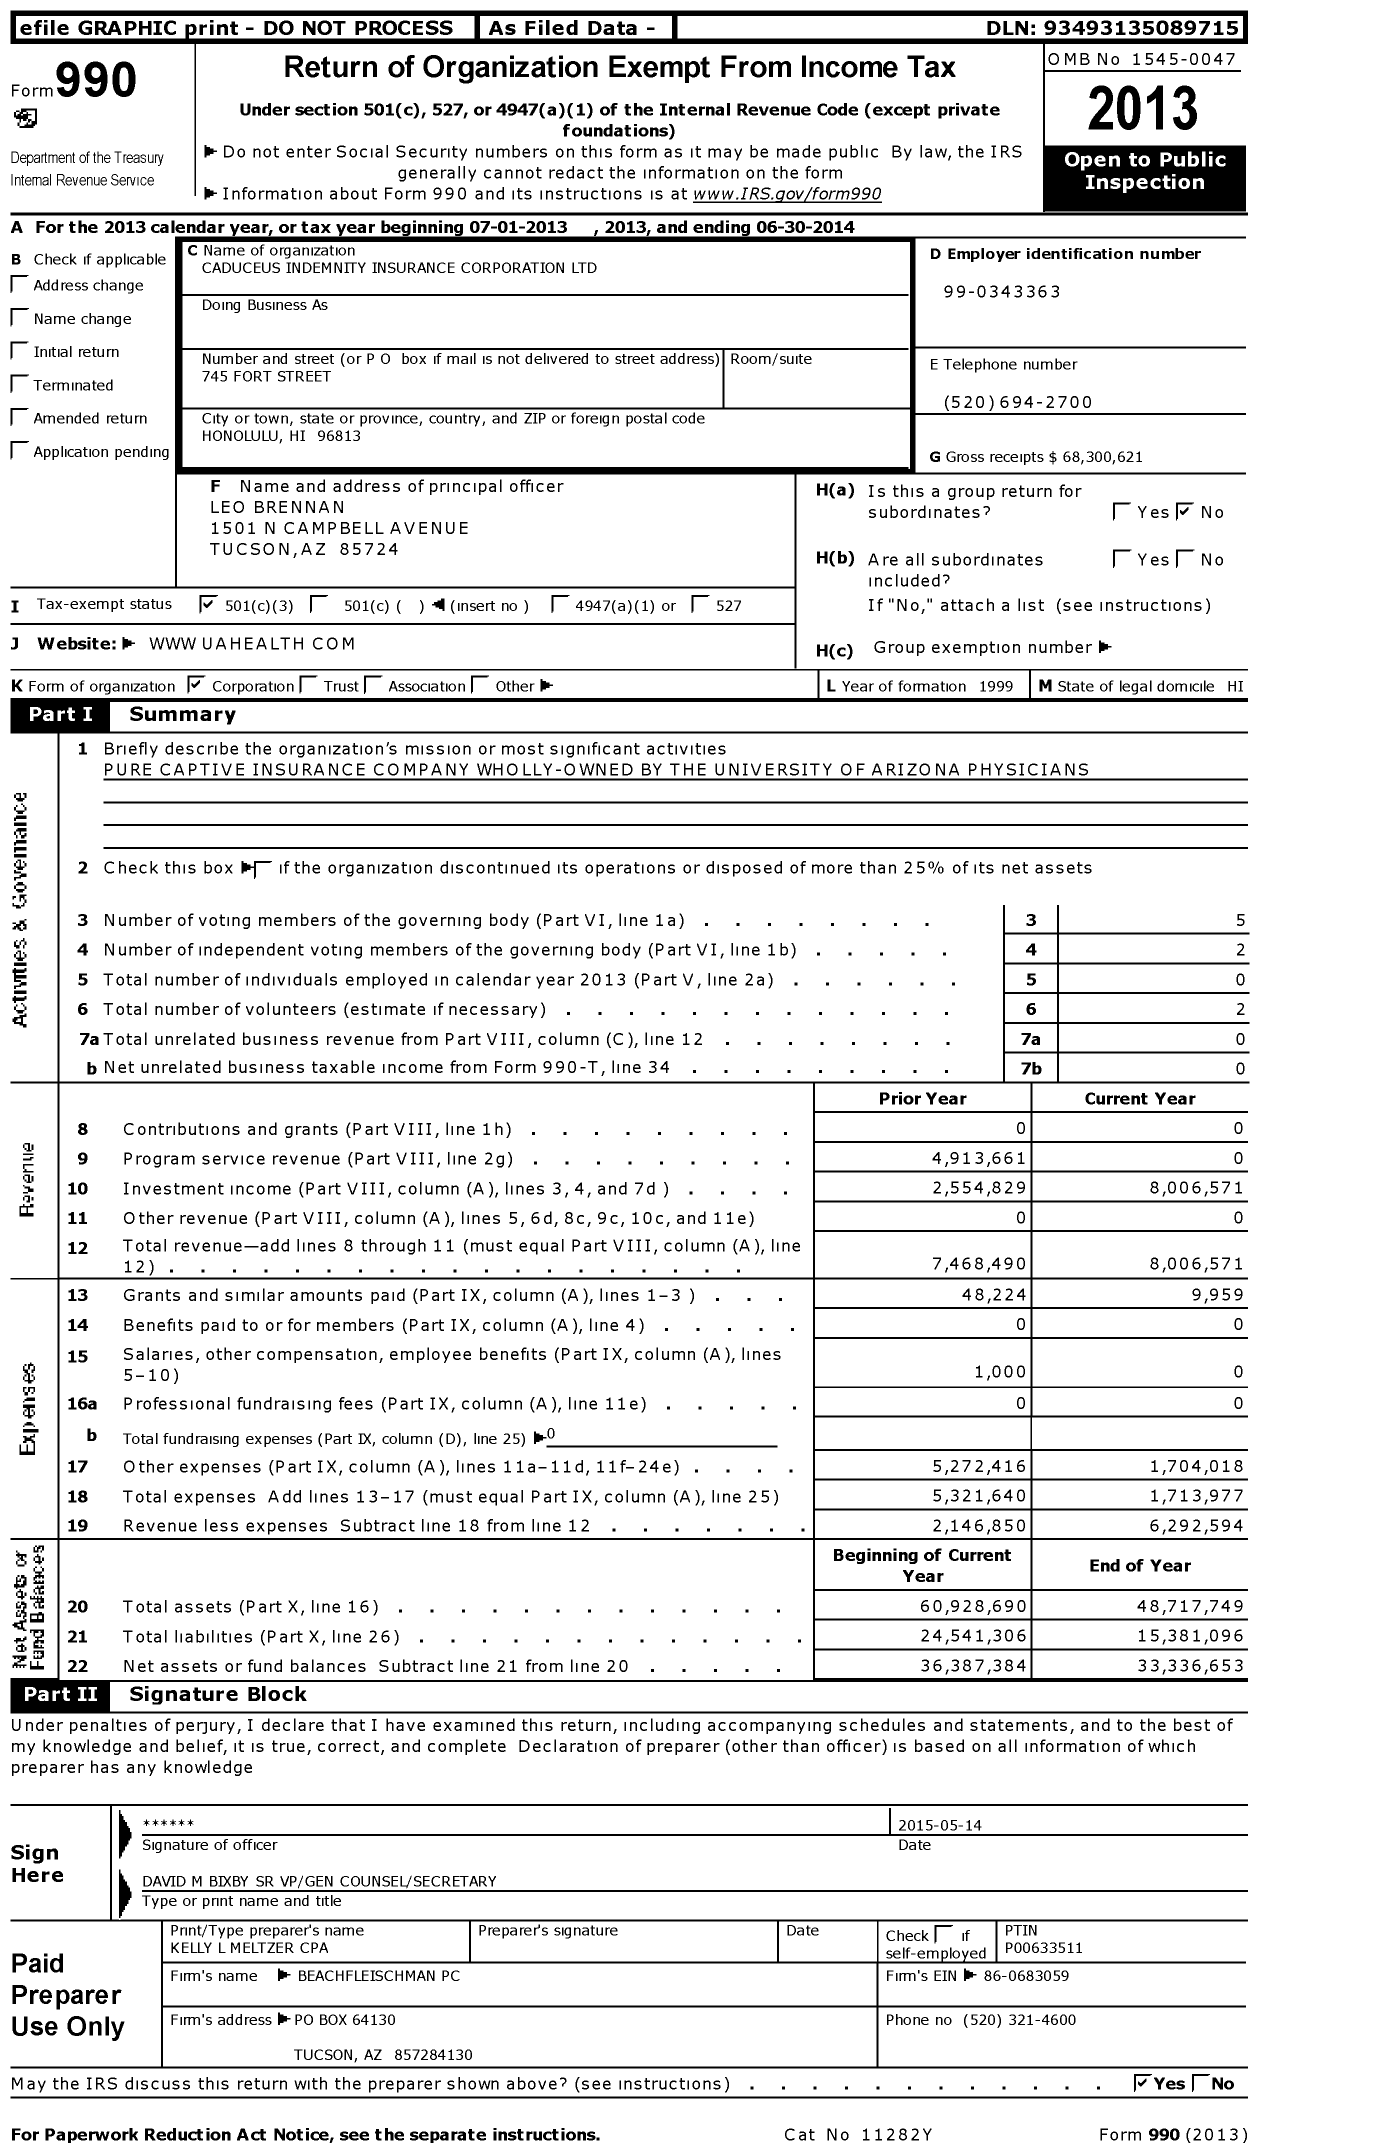 Image of first page of 2013 Form 990 for Caduceus Indemnity Insurance Corporation